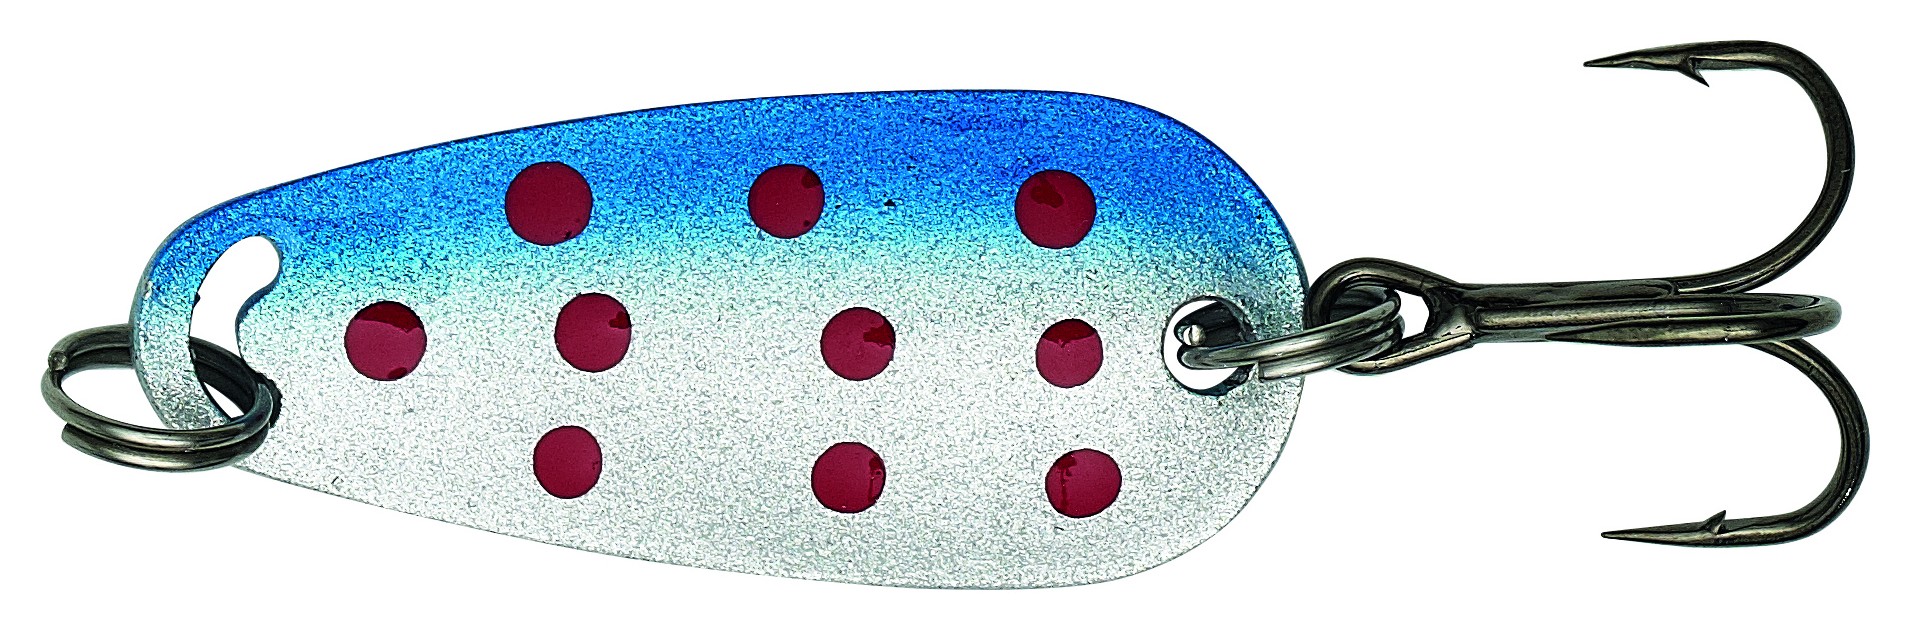 Trout Spoon Kinetic Volda Blue & Silver